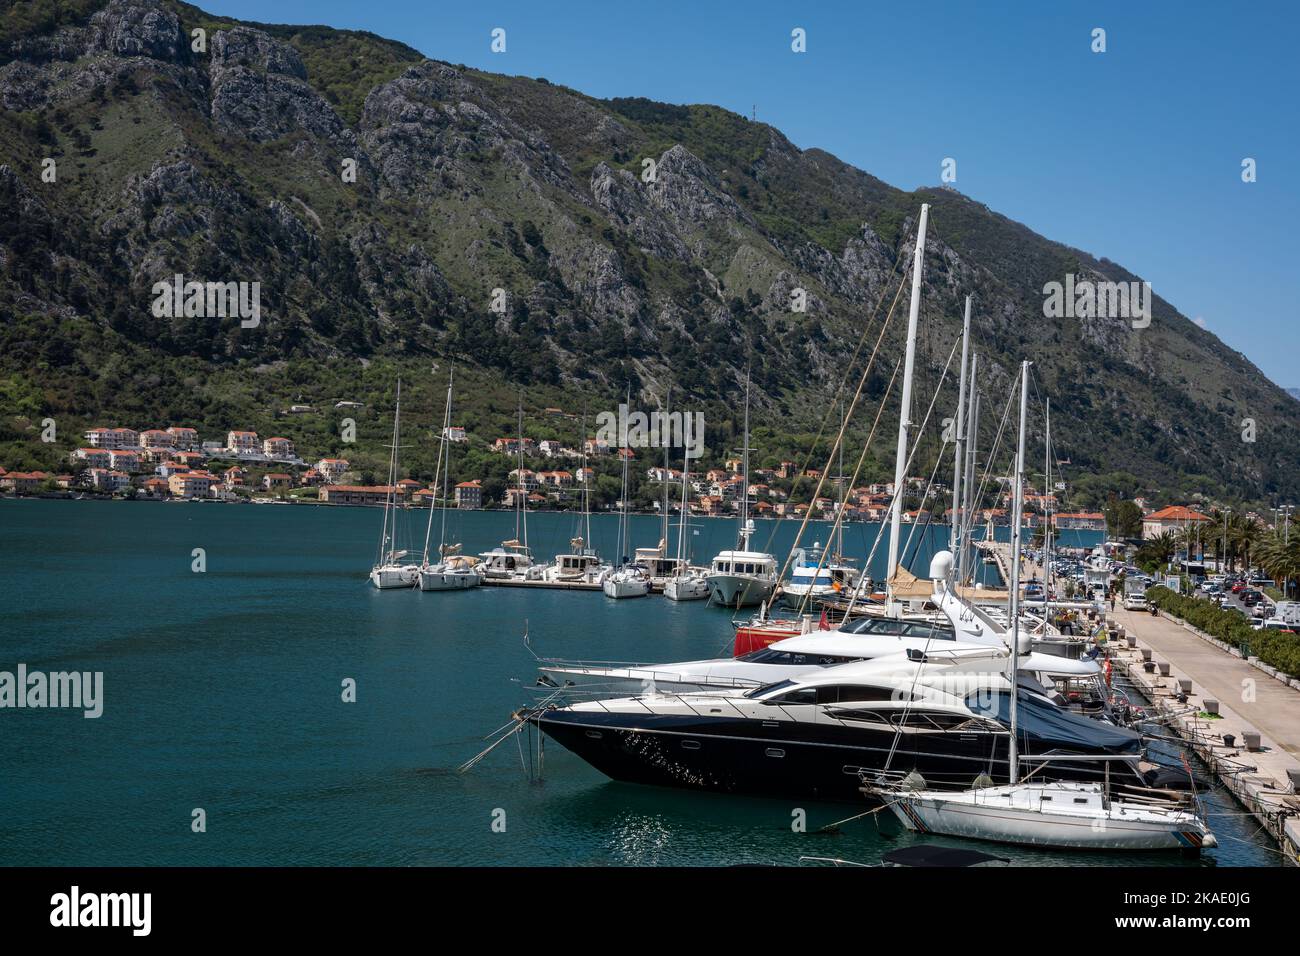 Kotor, Montenegro - April 29, 2022: Sailings yachts, motorboats and small fishing boats moored at the pier in the Kotor bay. Mountains in background. Stock Photo